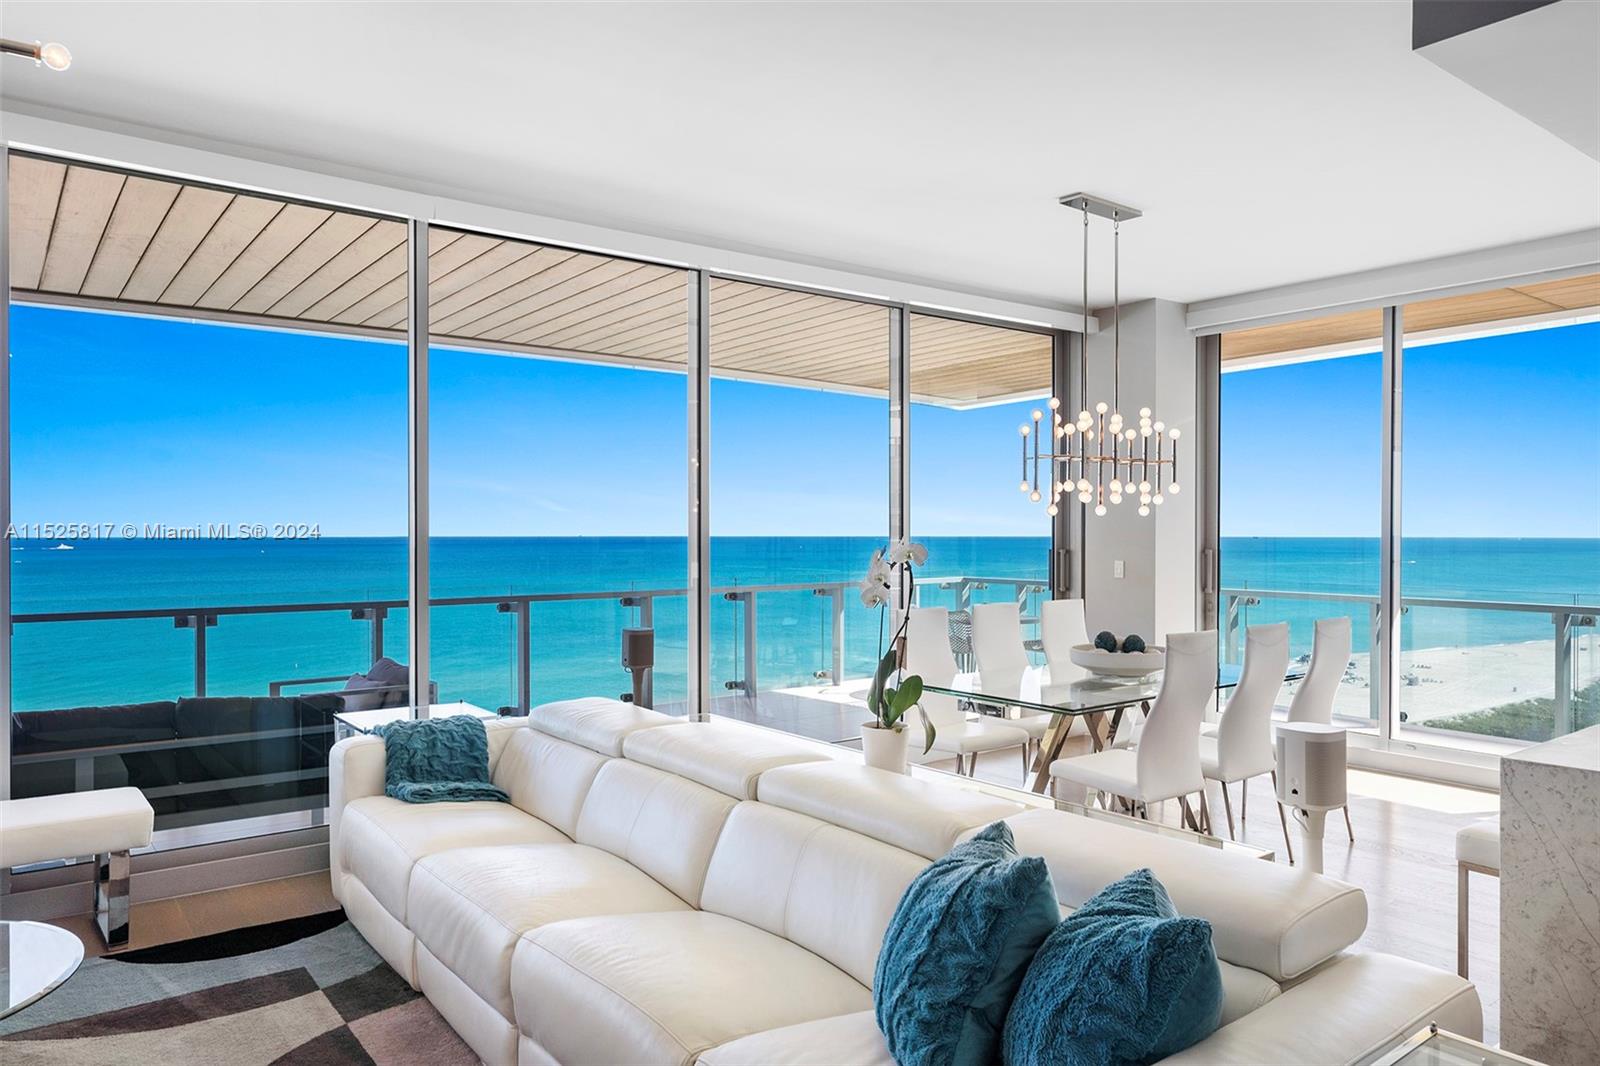 Stunning 3 Bedroom 3.5 Bath Unit on the sand at 57 Ocean - Millionaire's Row.  This residence features floor-to-ceiling windows, 12 foot deep terraces, open floor plan, private elevator and foyer.  There are top of the line poliform kitchen and bathrooms. Sub Zero and Wolf appliances.